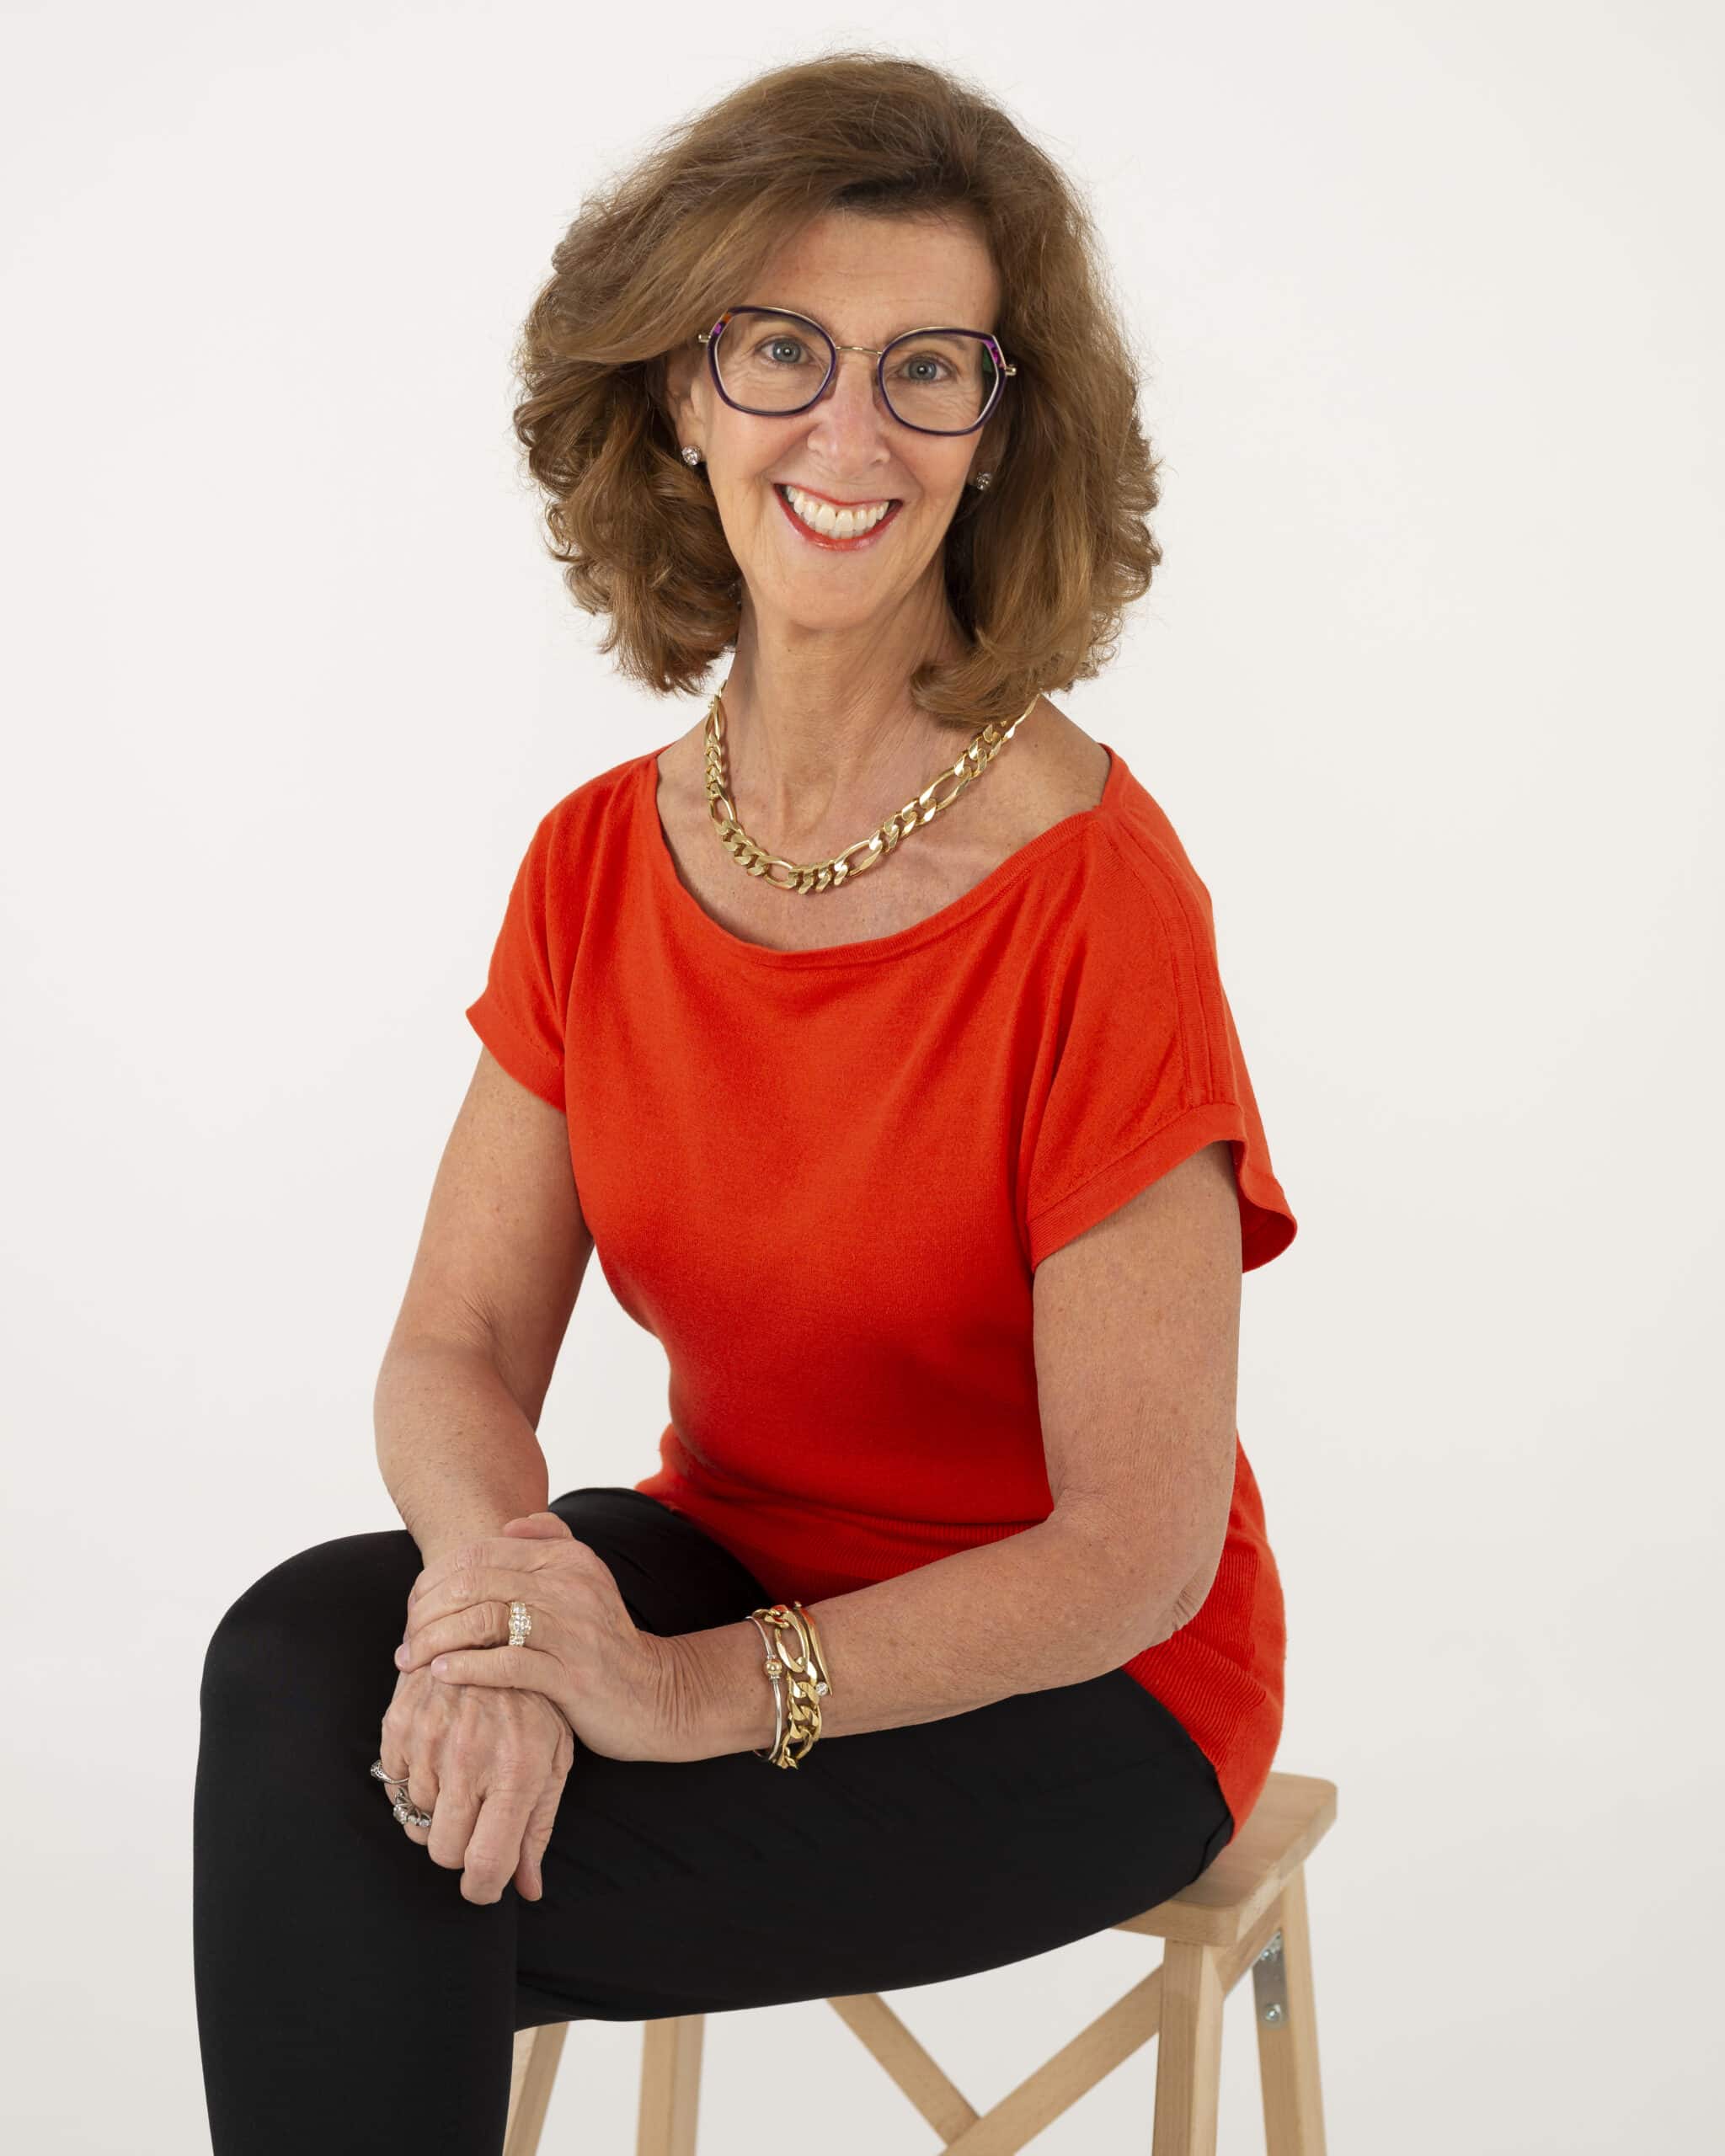 Image of Nancy Clairmont Carr sitting on a wooden stool with a red boat-neck shirt, gold necklace, and black slacks.